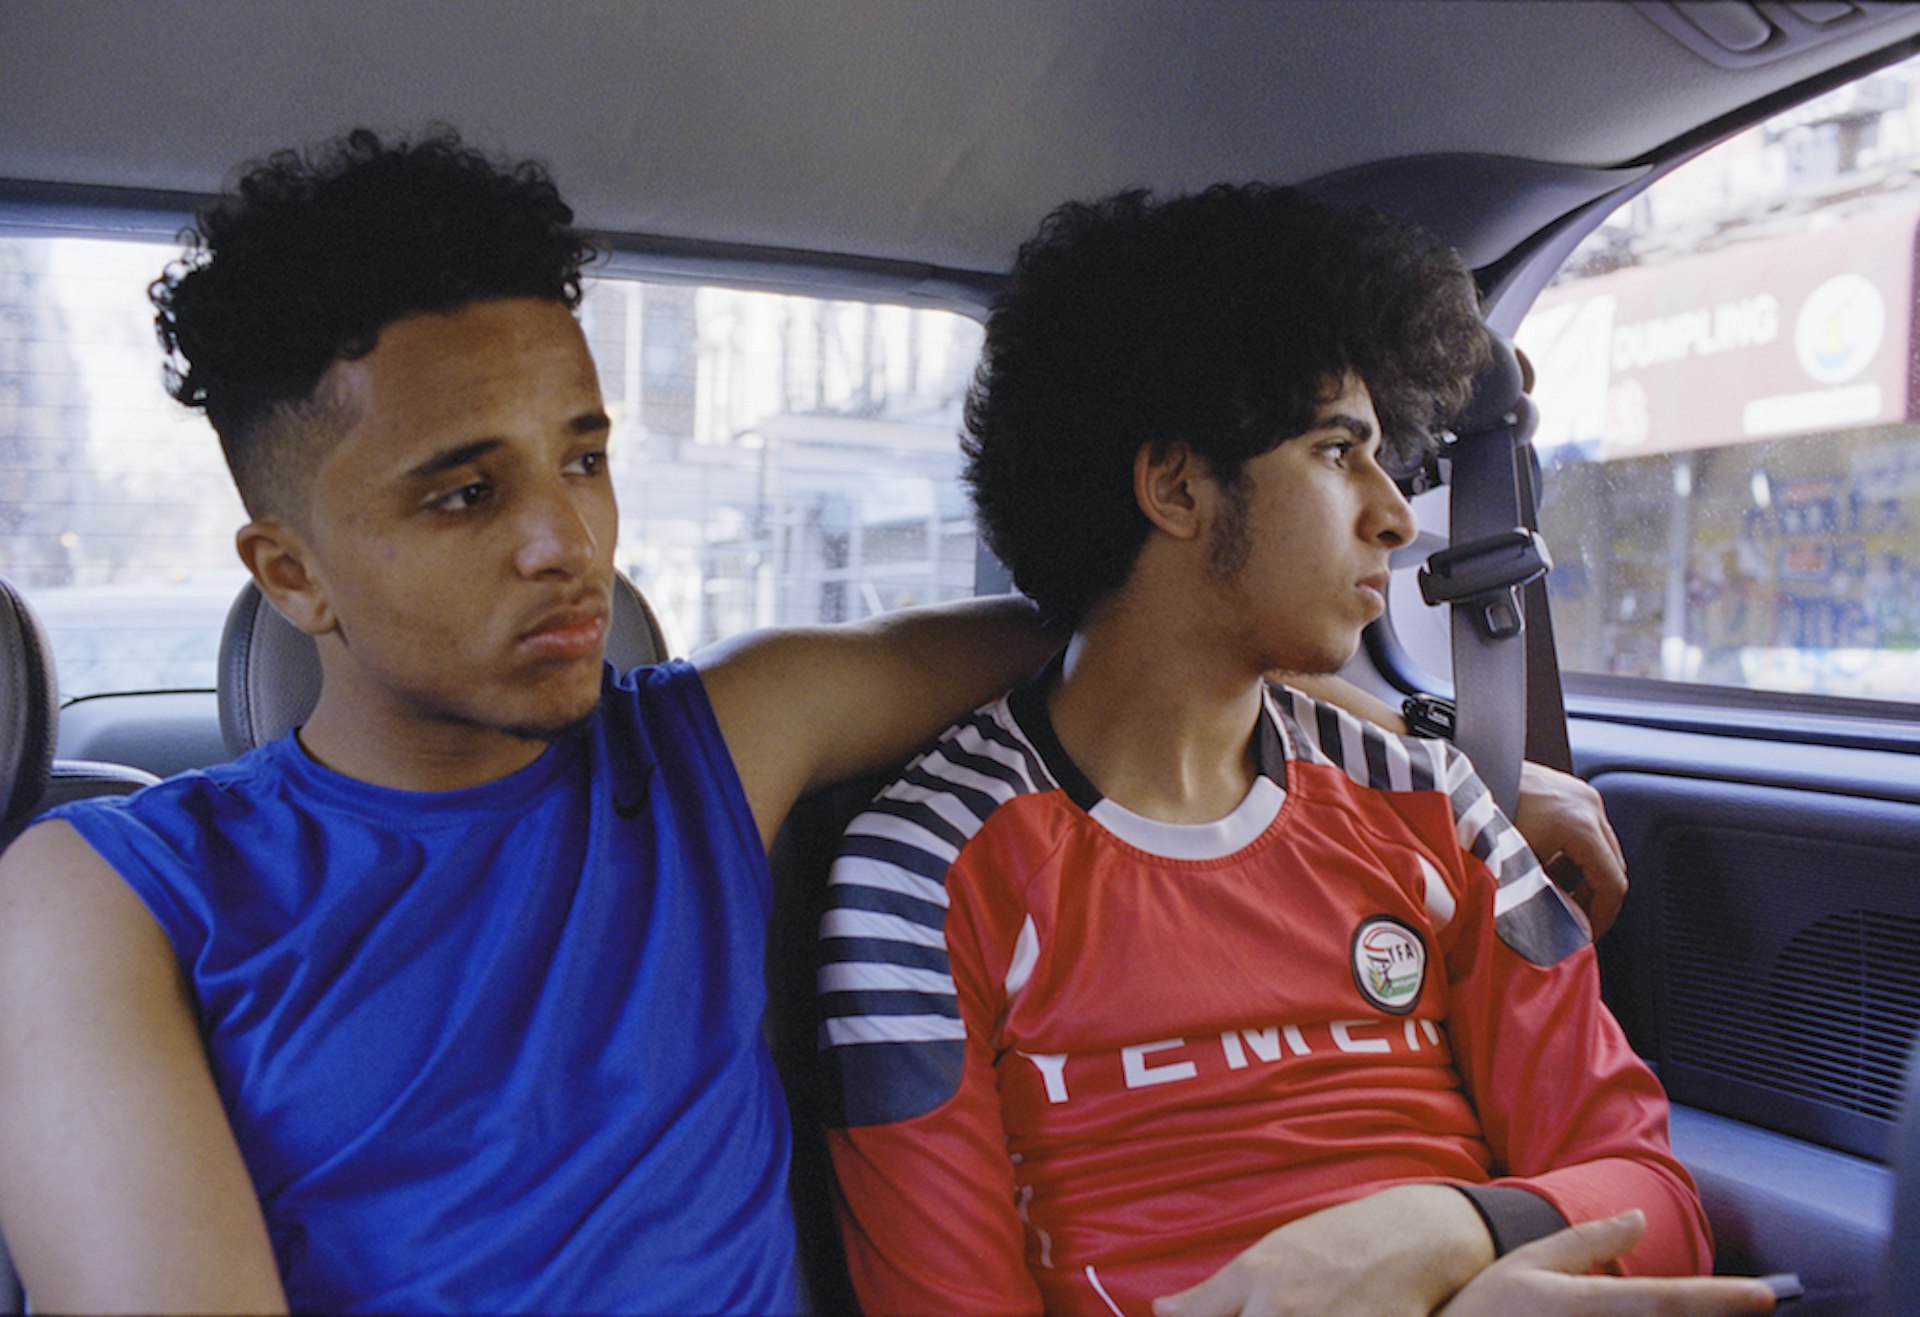 Ahmed Alzandhani and Osama Alsahybi ride in the back of Heidara Nasser's van after an early morning friendly game in the Bronx.